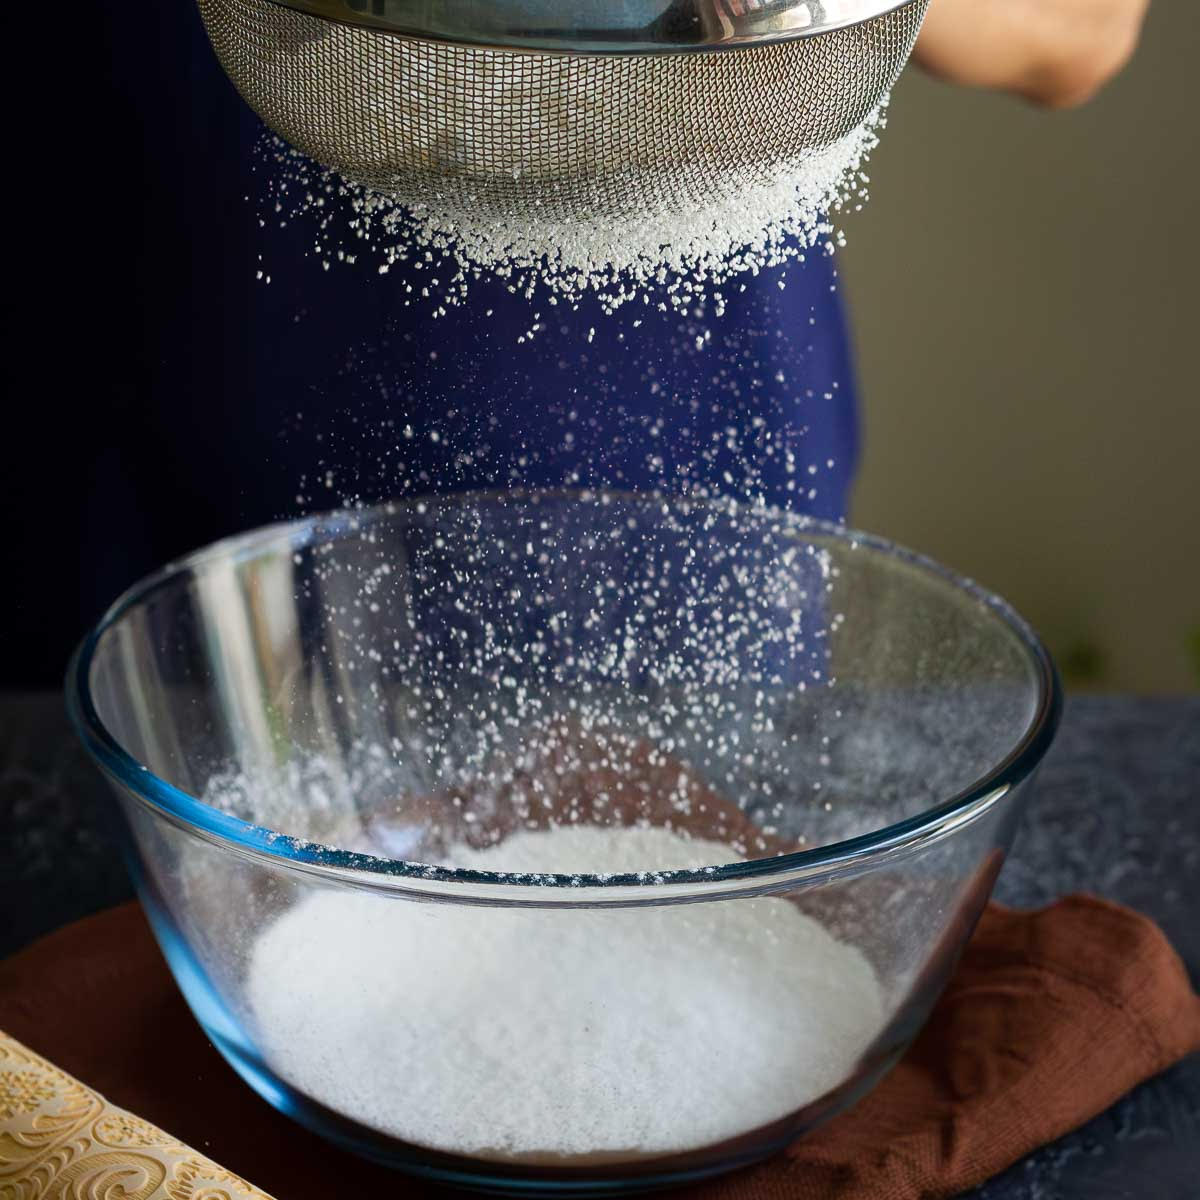 Guide to baking flours